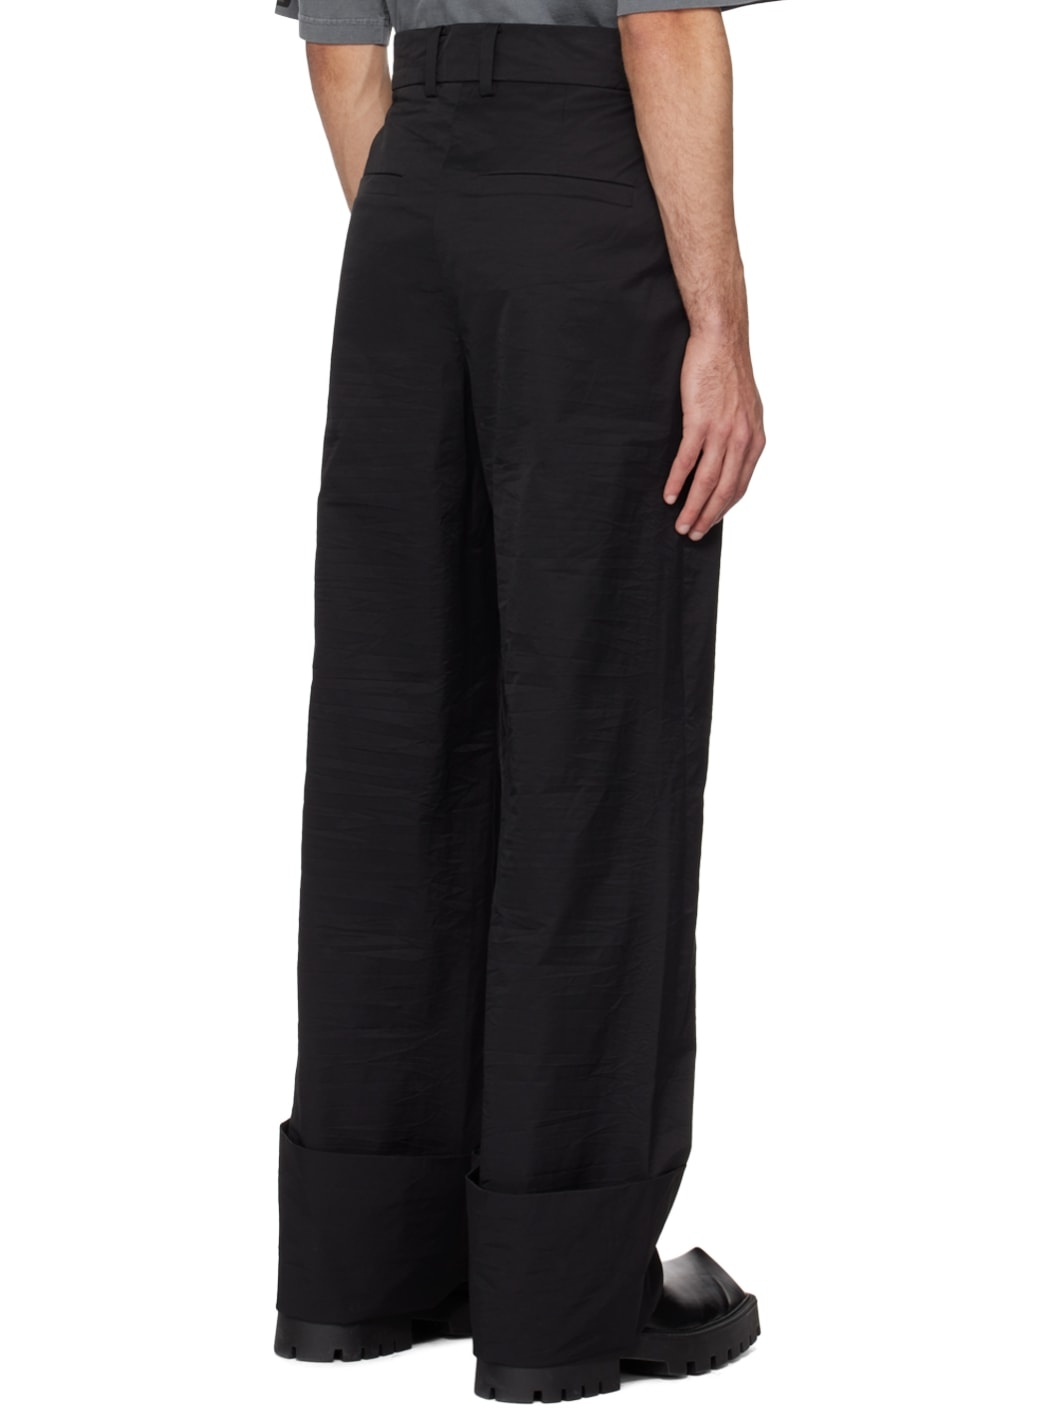 Black Roll-Up Trousers - 3